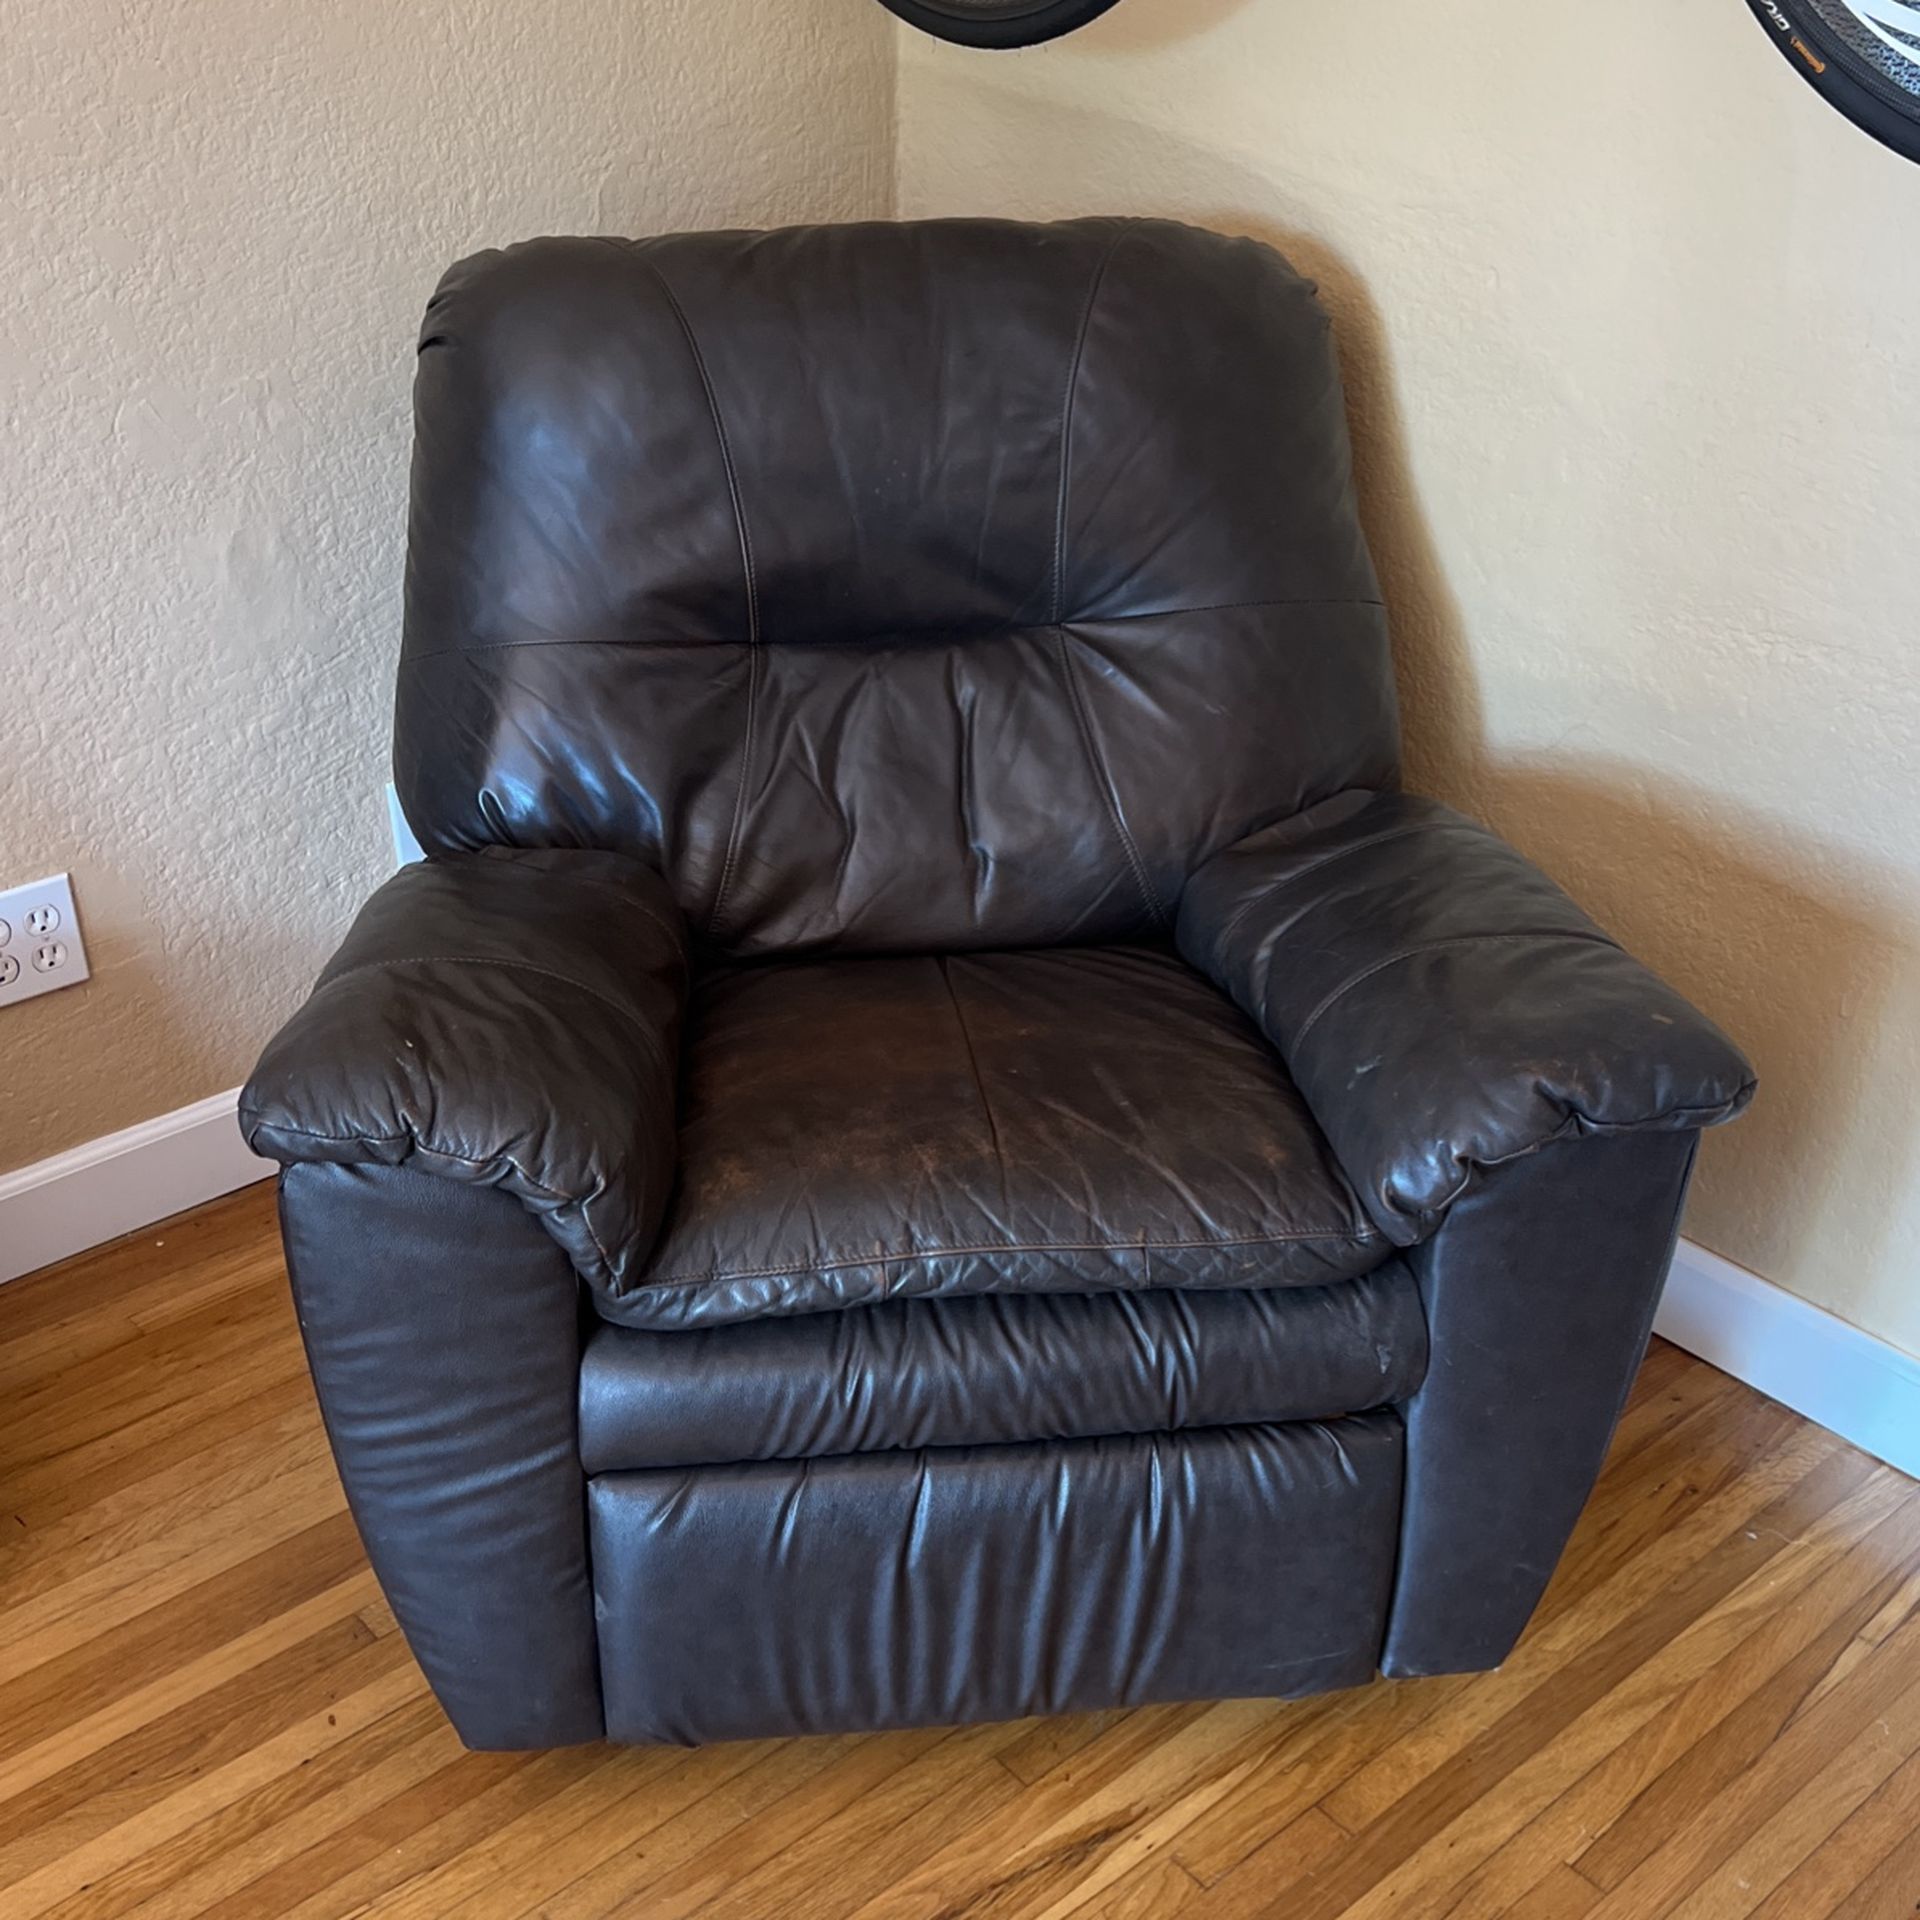 FREE Ashley Furniture Recliner Chair